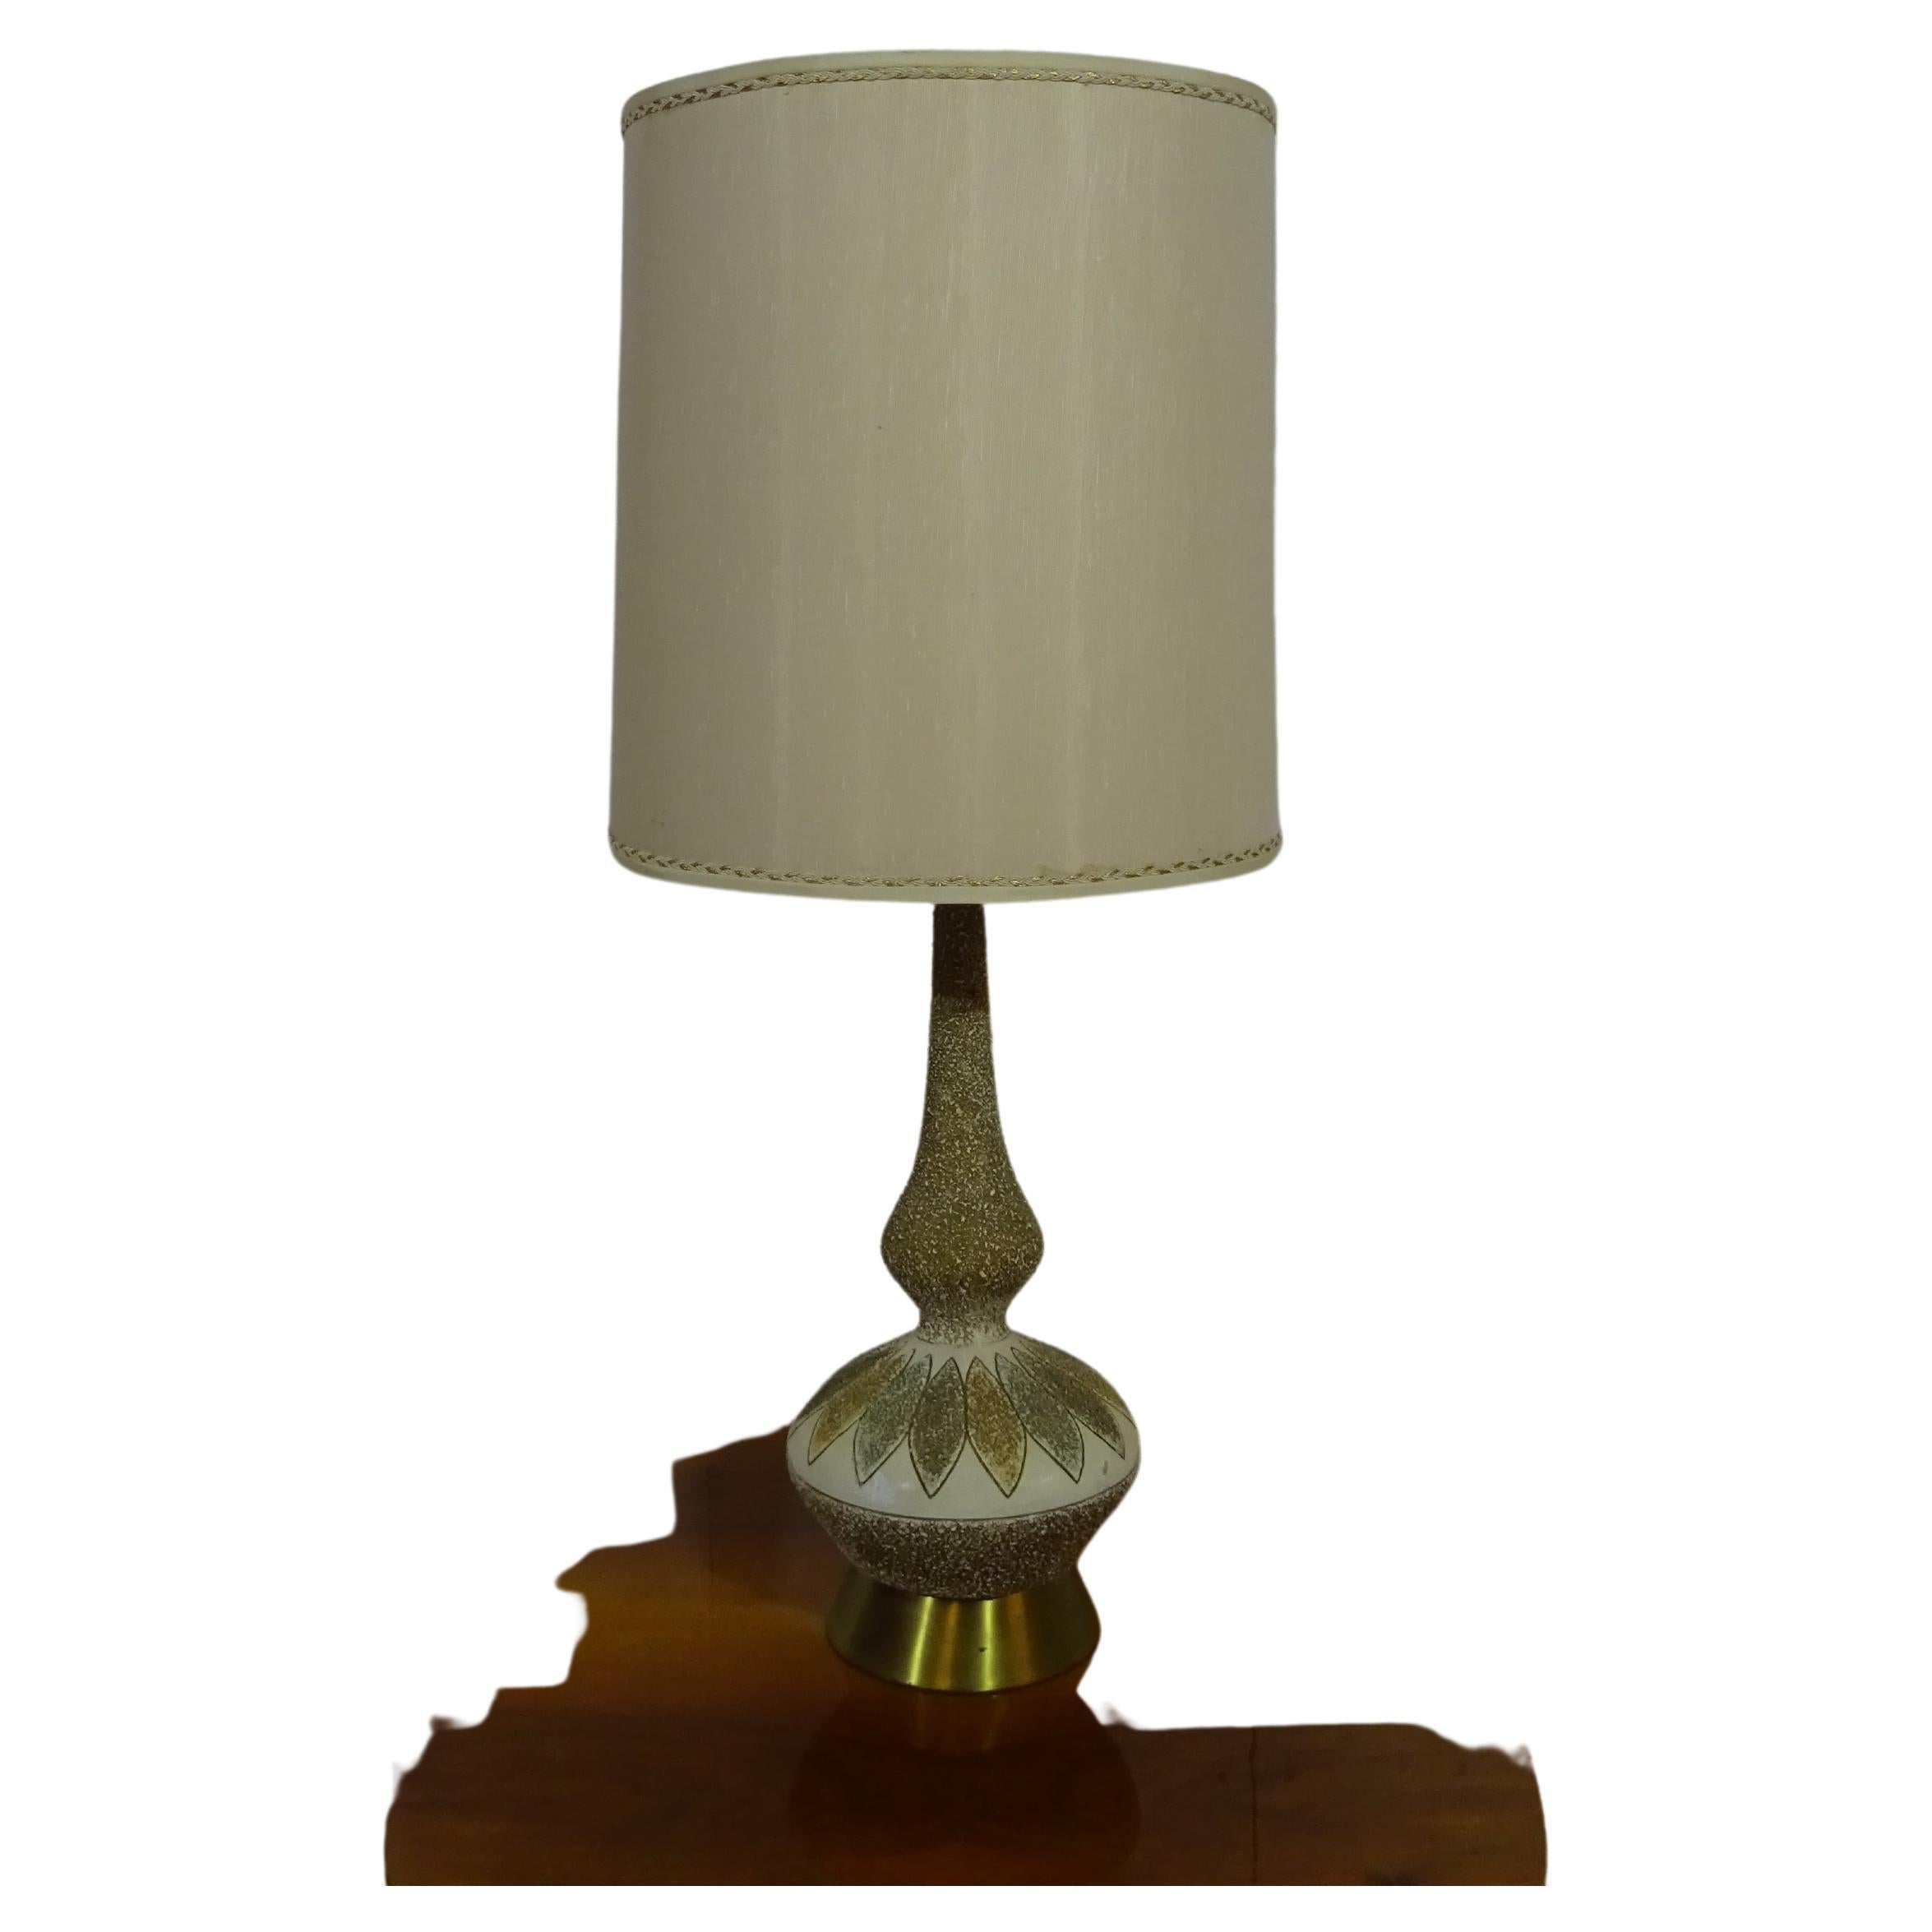 Large 1950's Table Lamp